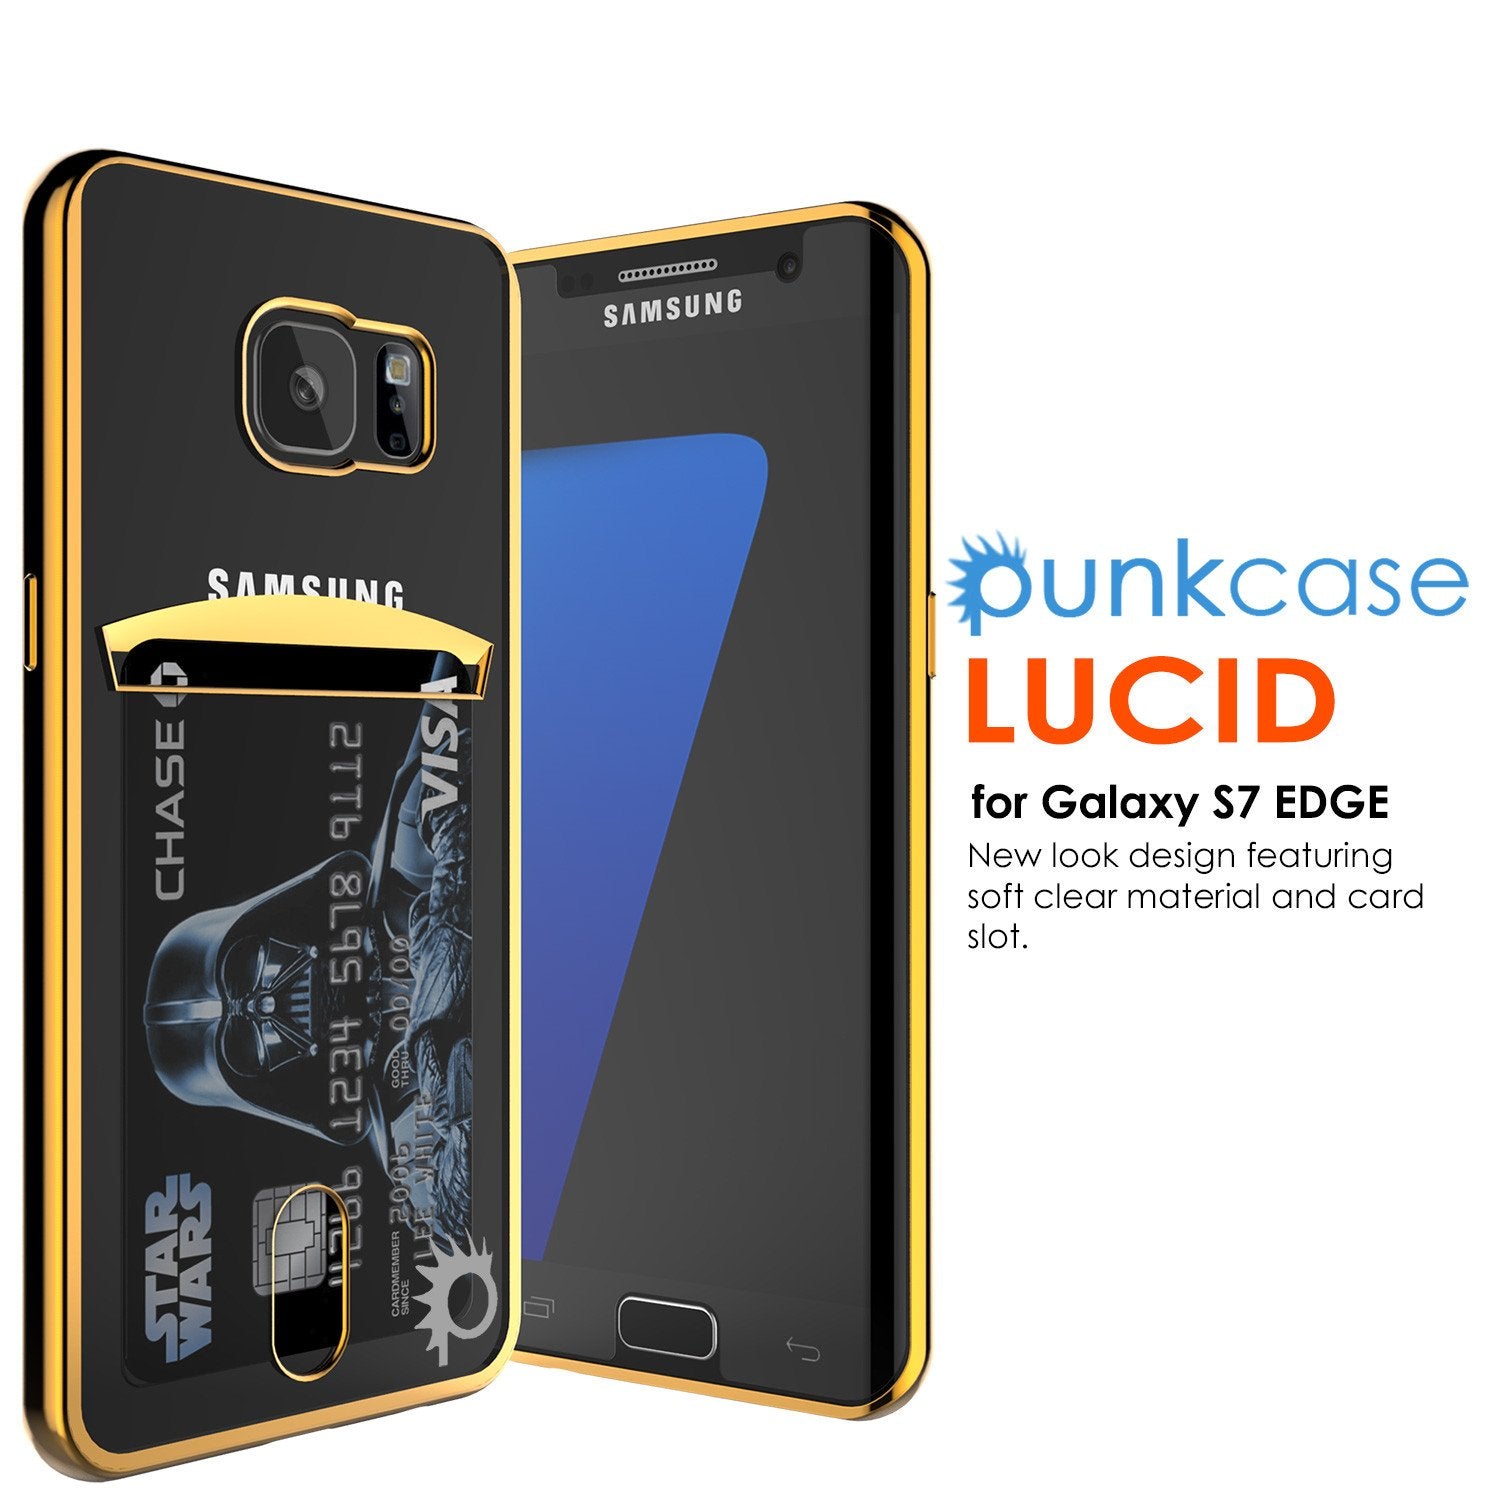 Galaxy S7 EDGE Case, PUNKCASE® LUCID Gold Series | Card Slot | SHIELD Screen Protector | Ultra fit - PunkCase NZ